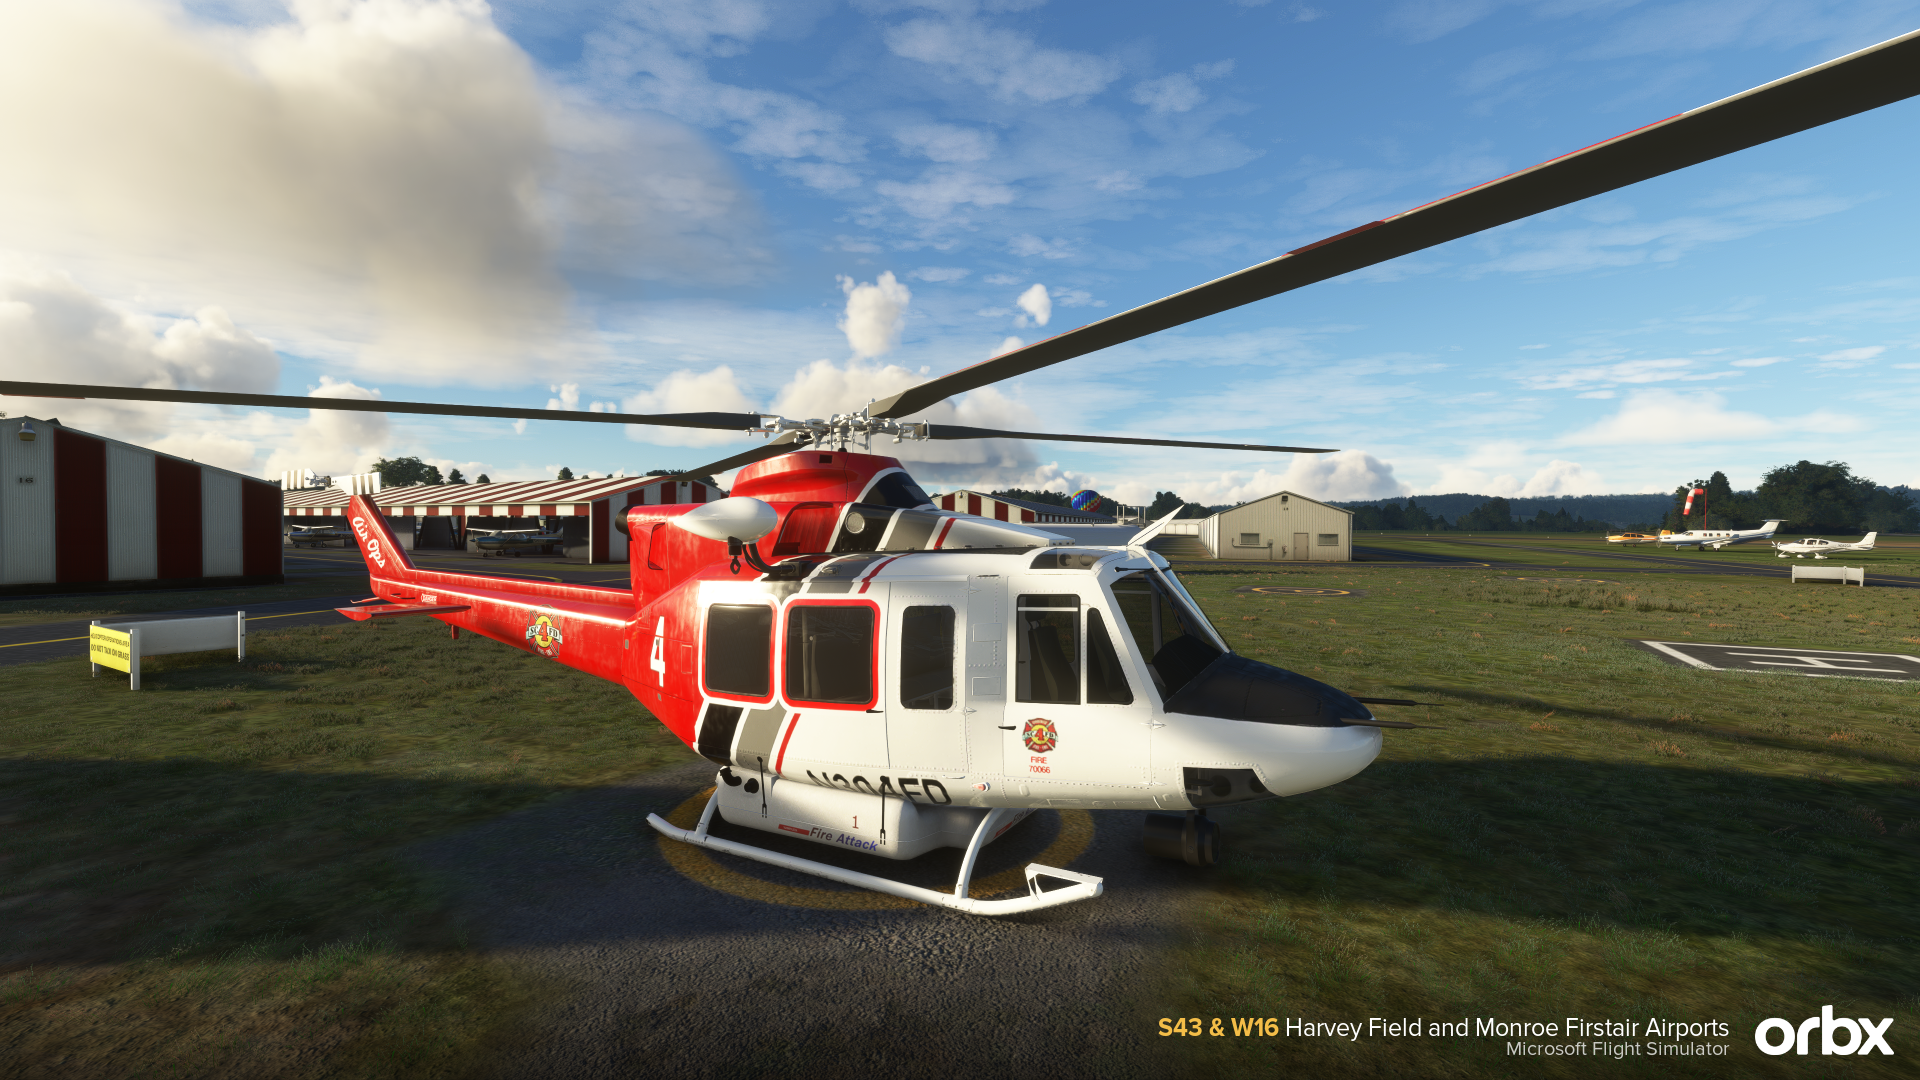 [Now Available] Orbx Announces S43 Harvey & W16 Monroe Combo Pack for MSFS